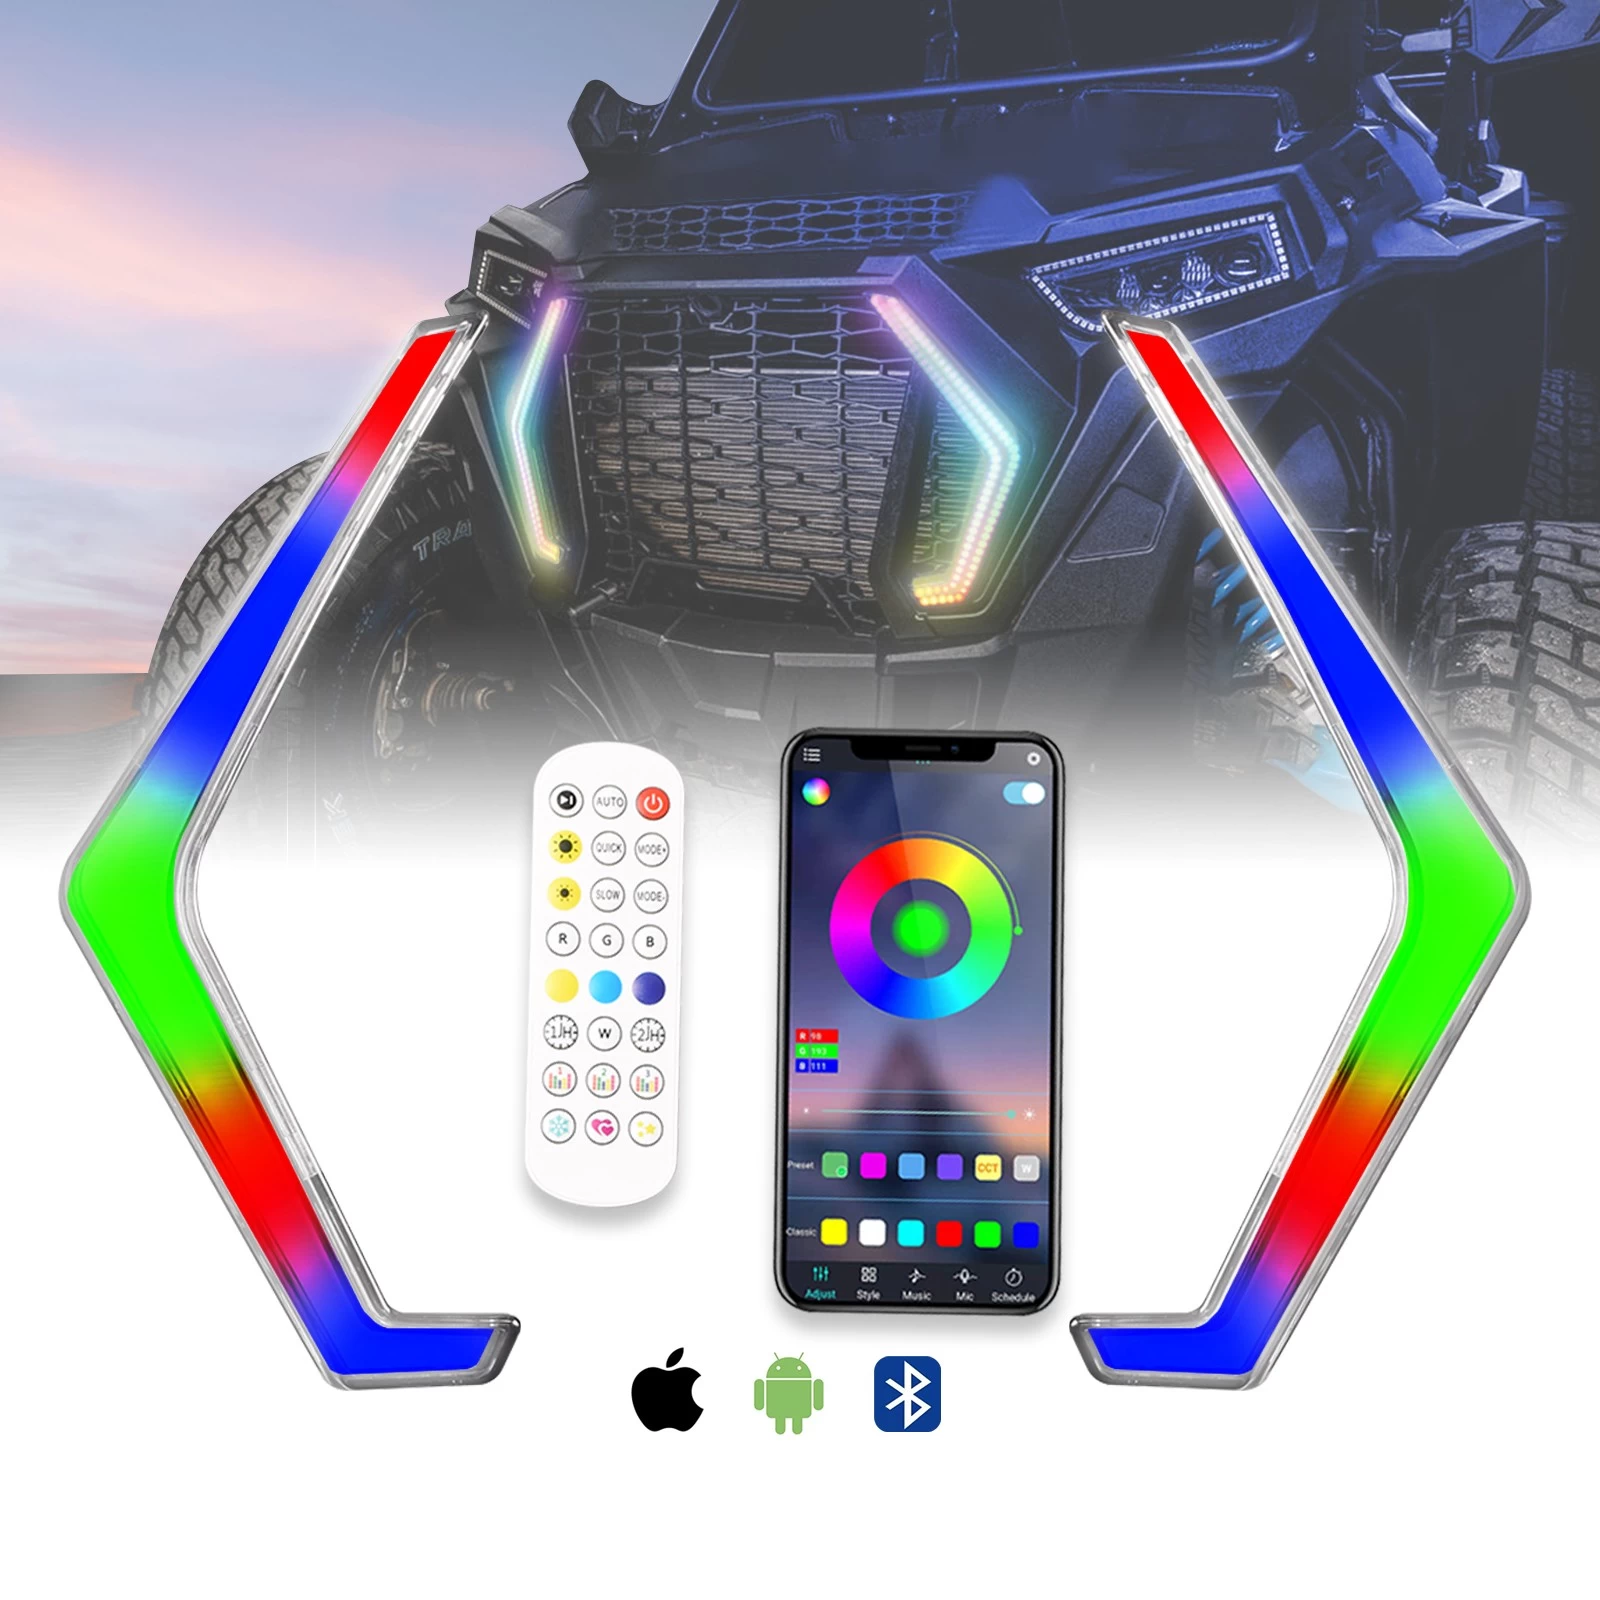 Chiny Unionlux RZR Turn Signal Fang Lights , LED Turn Signal light with Chasing Color ,Remote Control, Front Signature Accent Fang Light Assembly for Polaris RZR XP 1000 Turbo 2019 2020 2021 producent